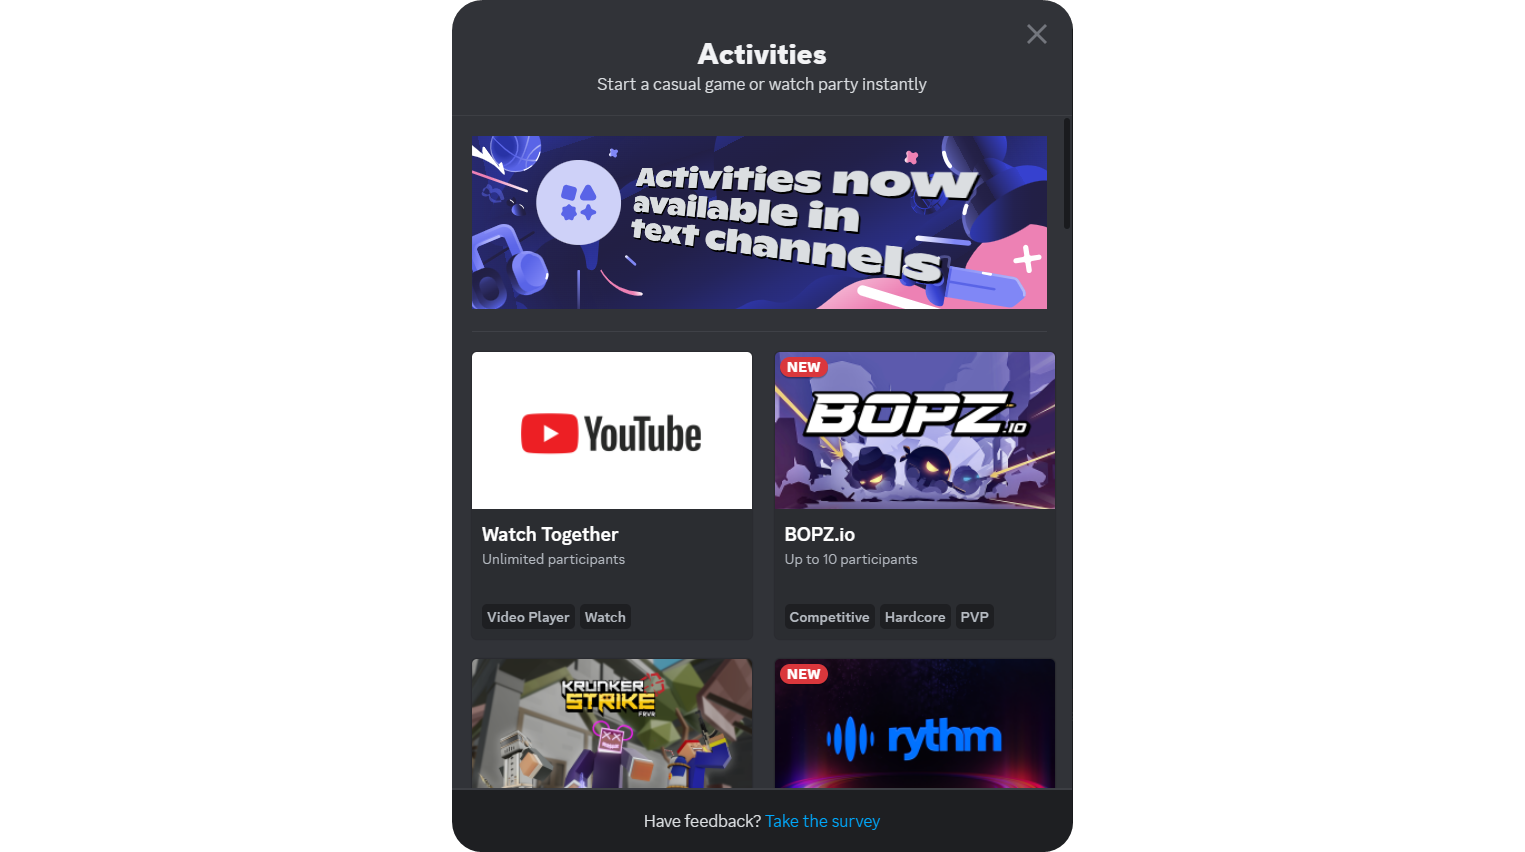 The Activities pop-up on Discord